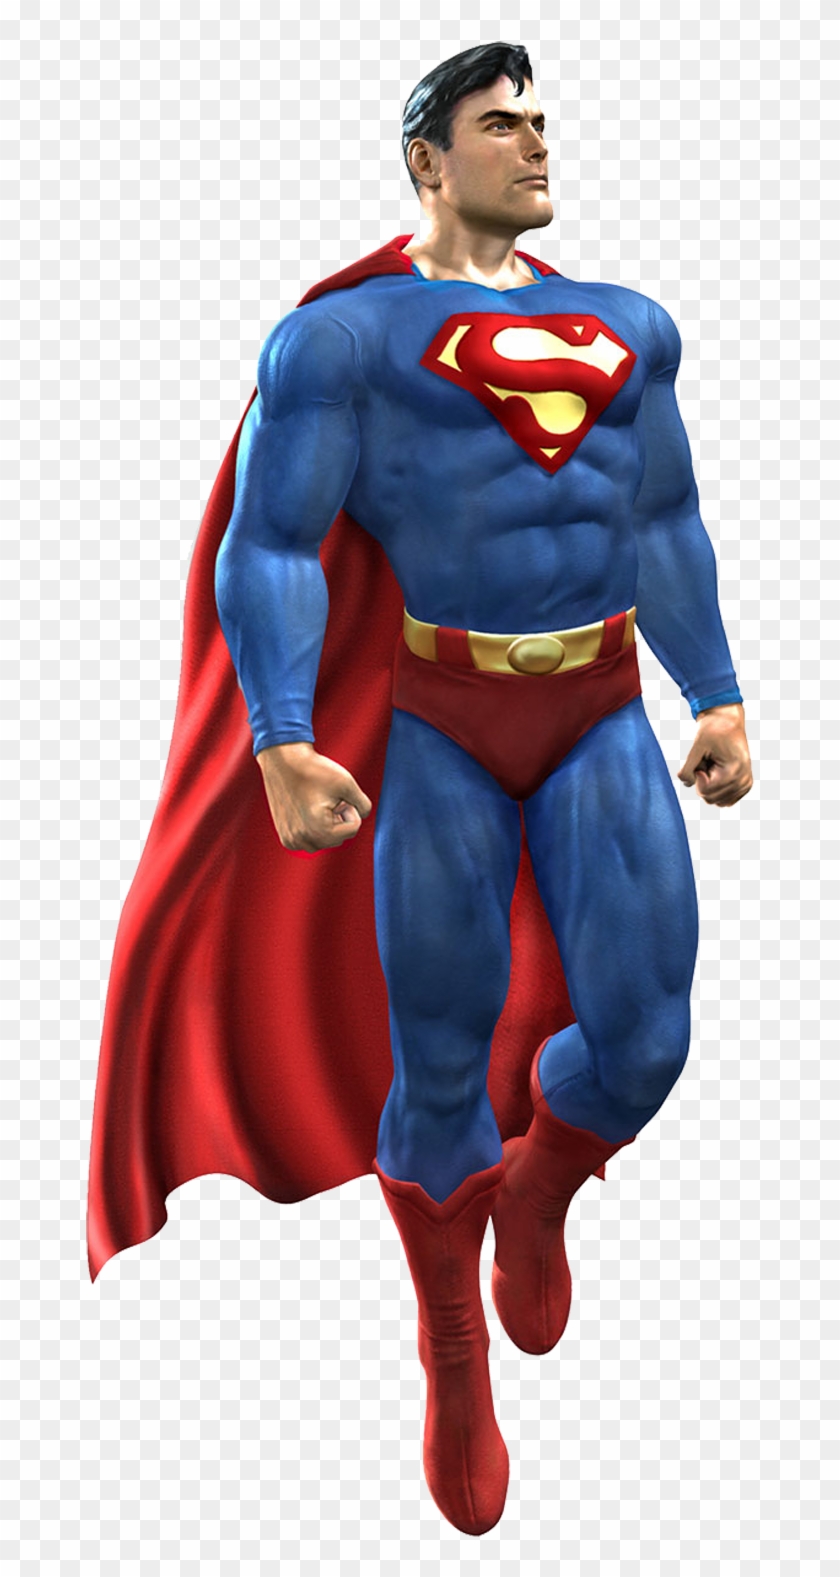 Superman Png - Superman With No Background Clipart #625554